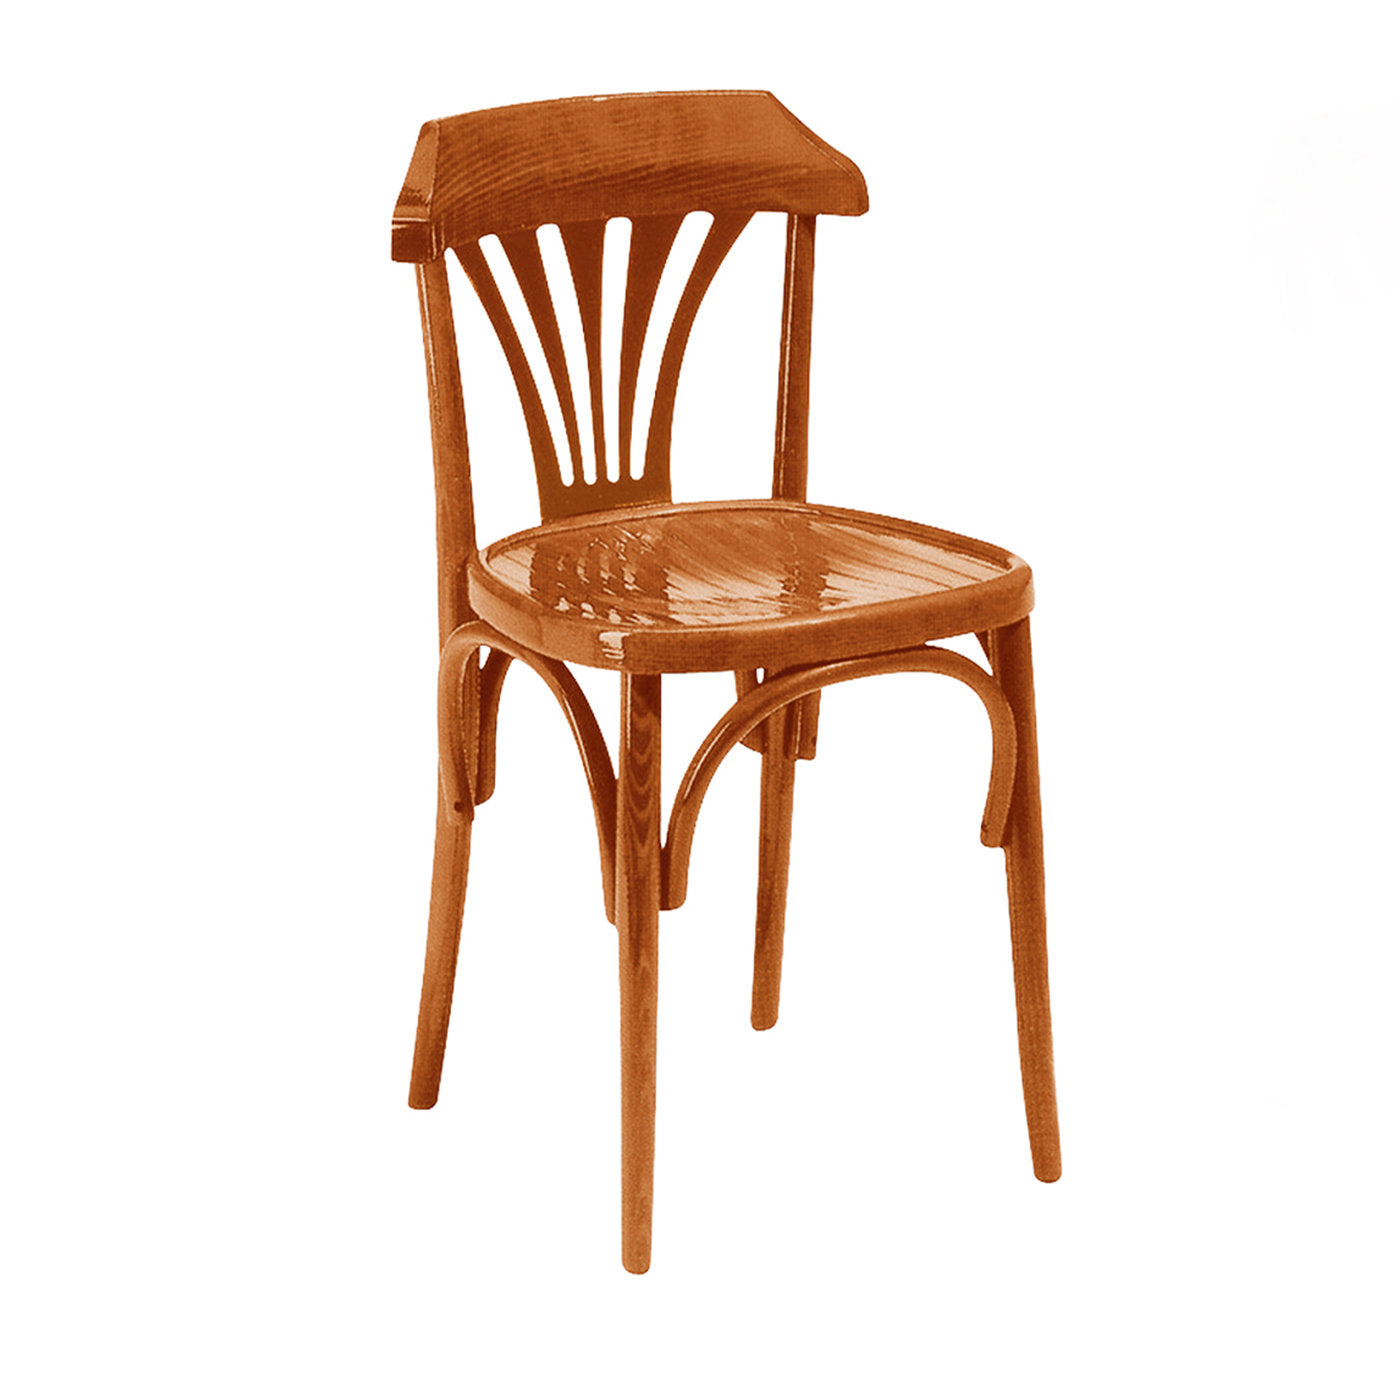 690 Set of 2 Chairs - Main view